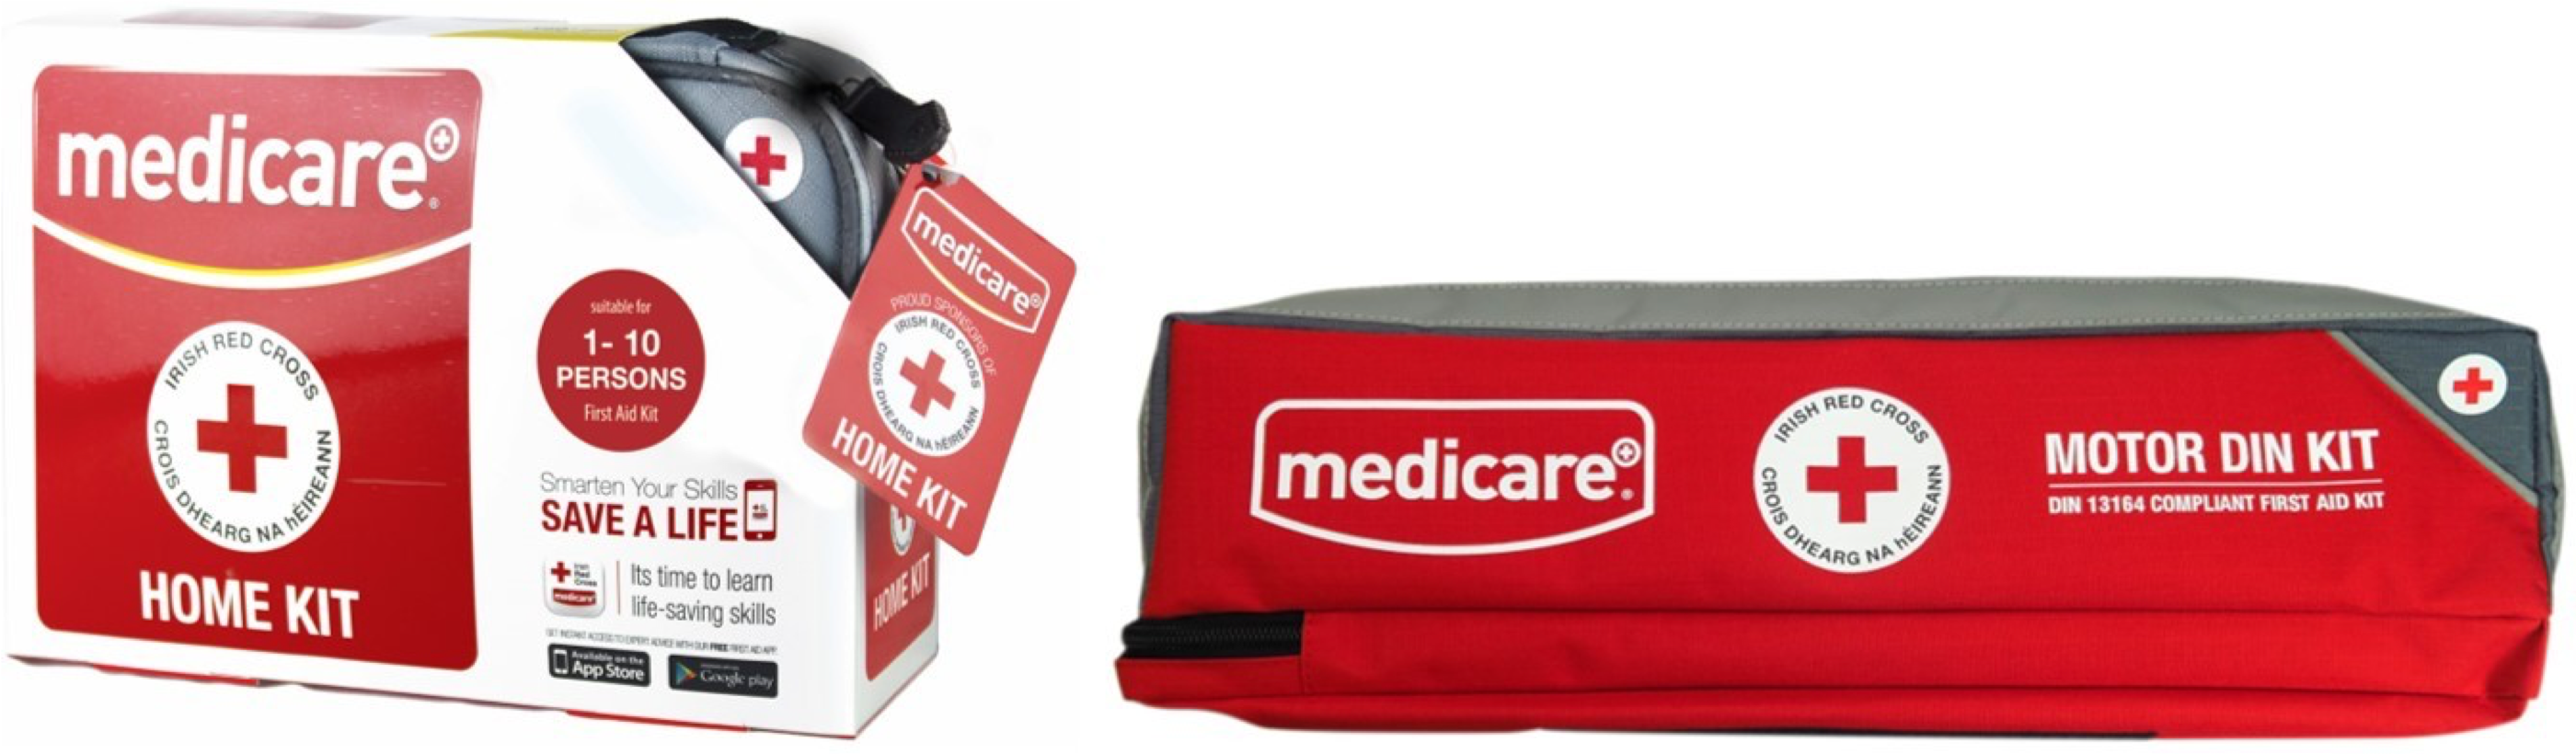 Medicare First Aid Kits Motor and Home